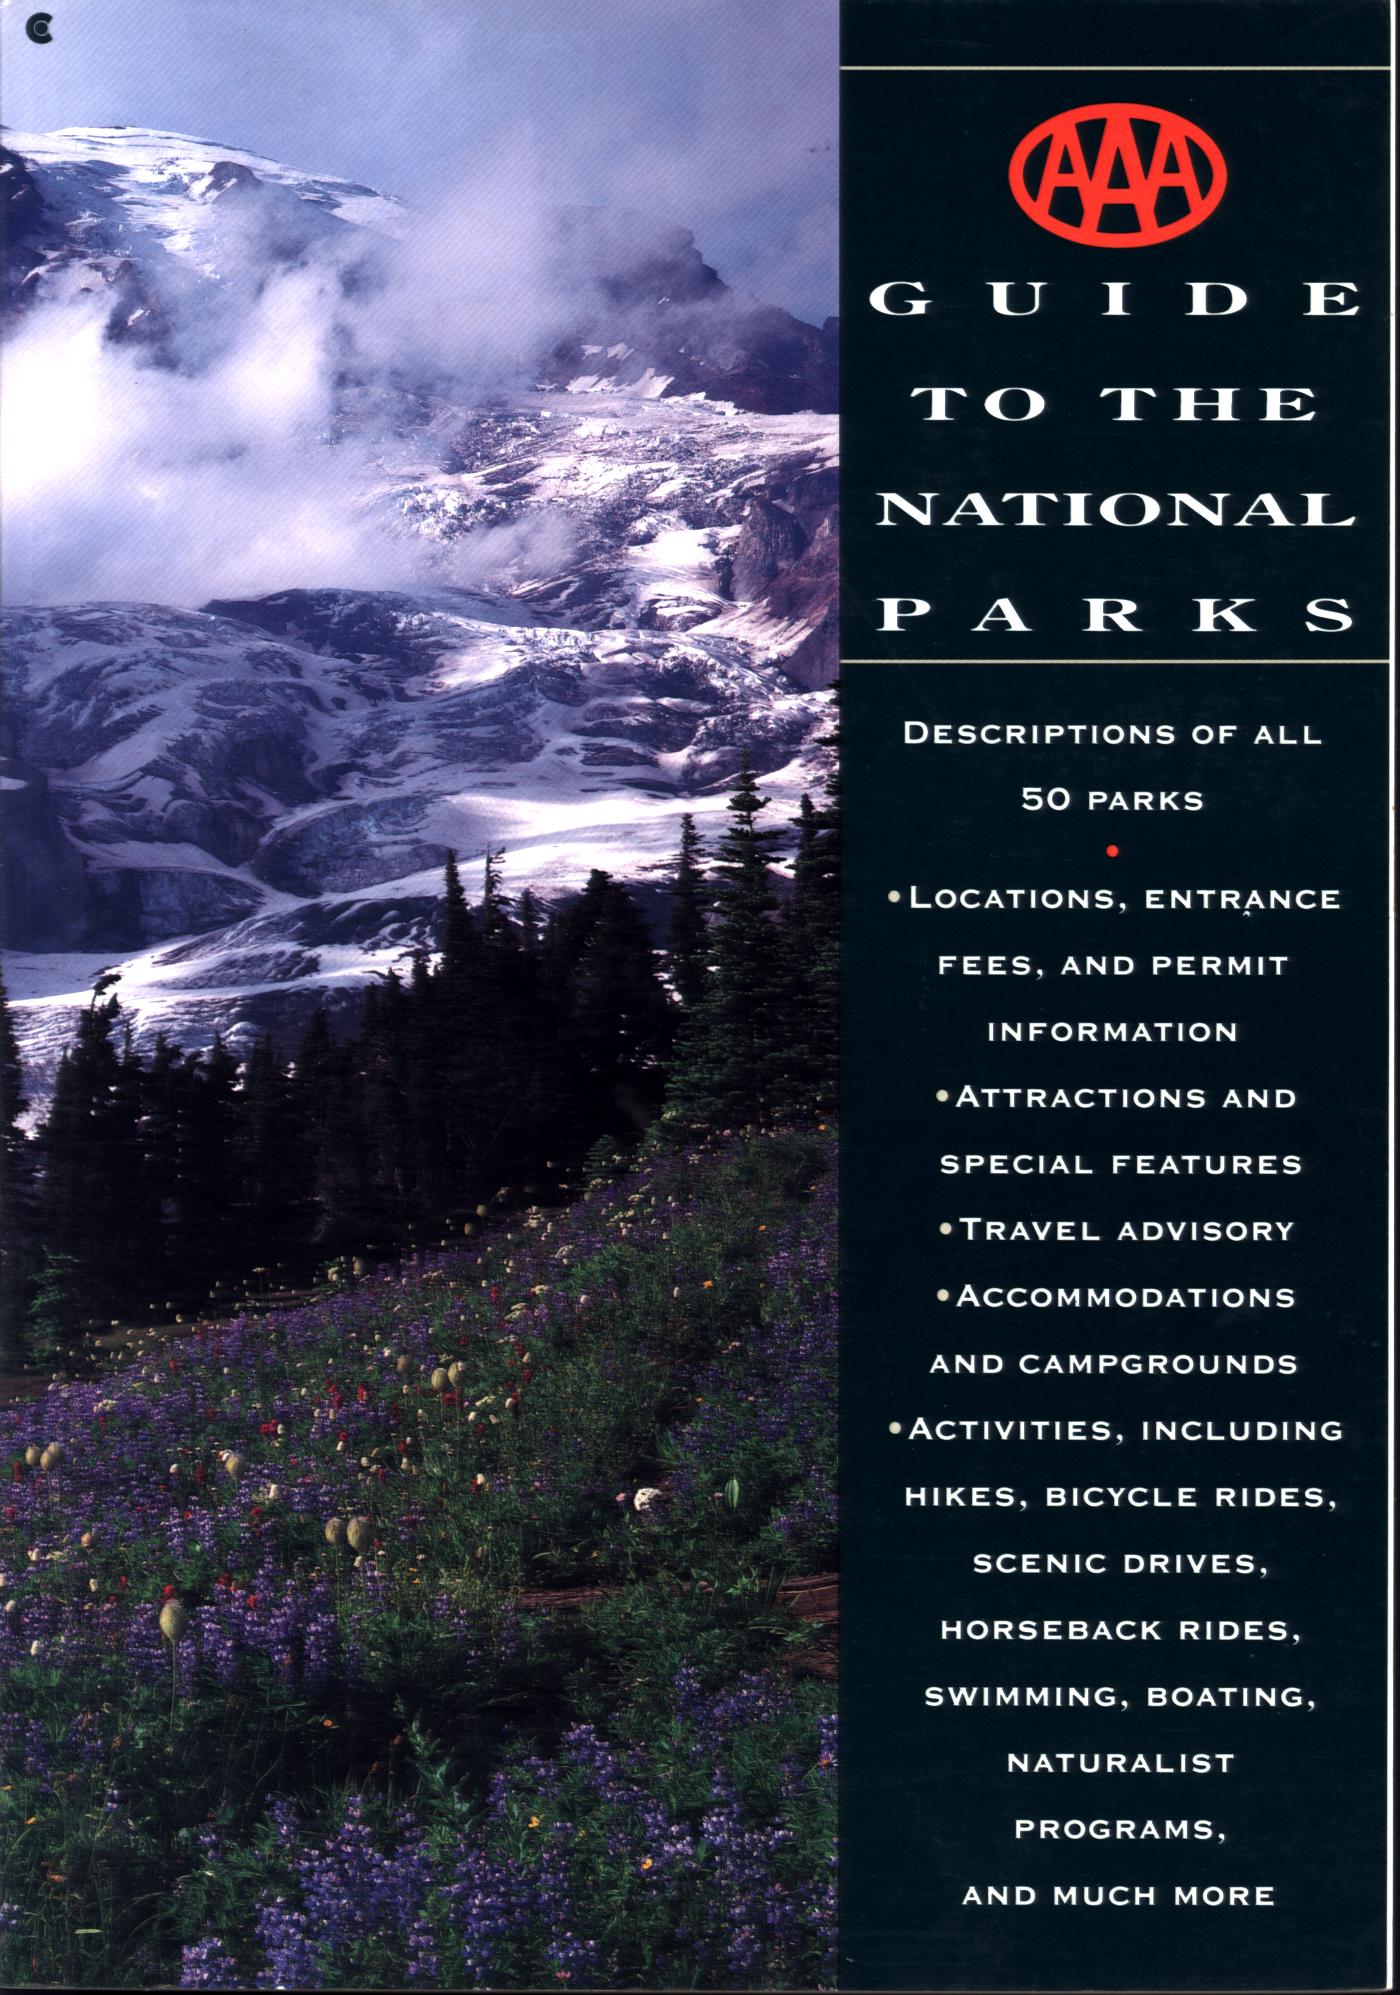 AAA GUIDE TO THE NATIONAL PARKS. 